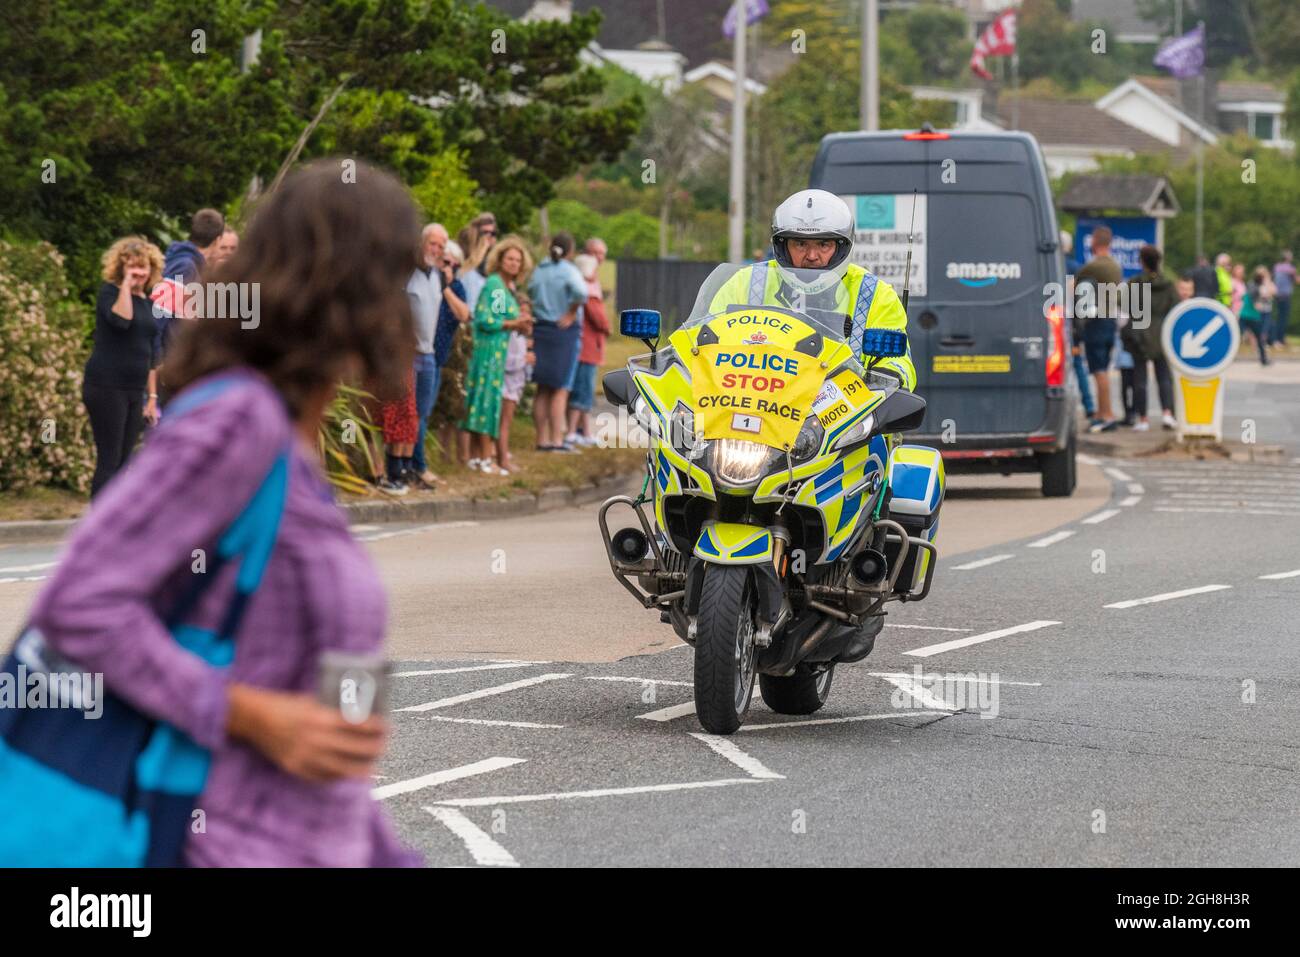 A pedestrian walking across a road in front of police patrol motorcyclist riding into Newquay in Cornwall during the opening stage of the iconic Tour Stock Photo